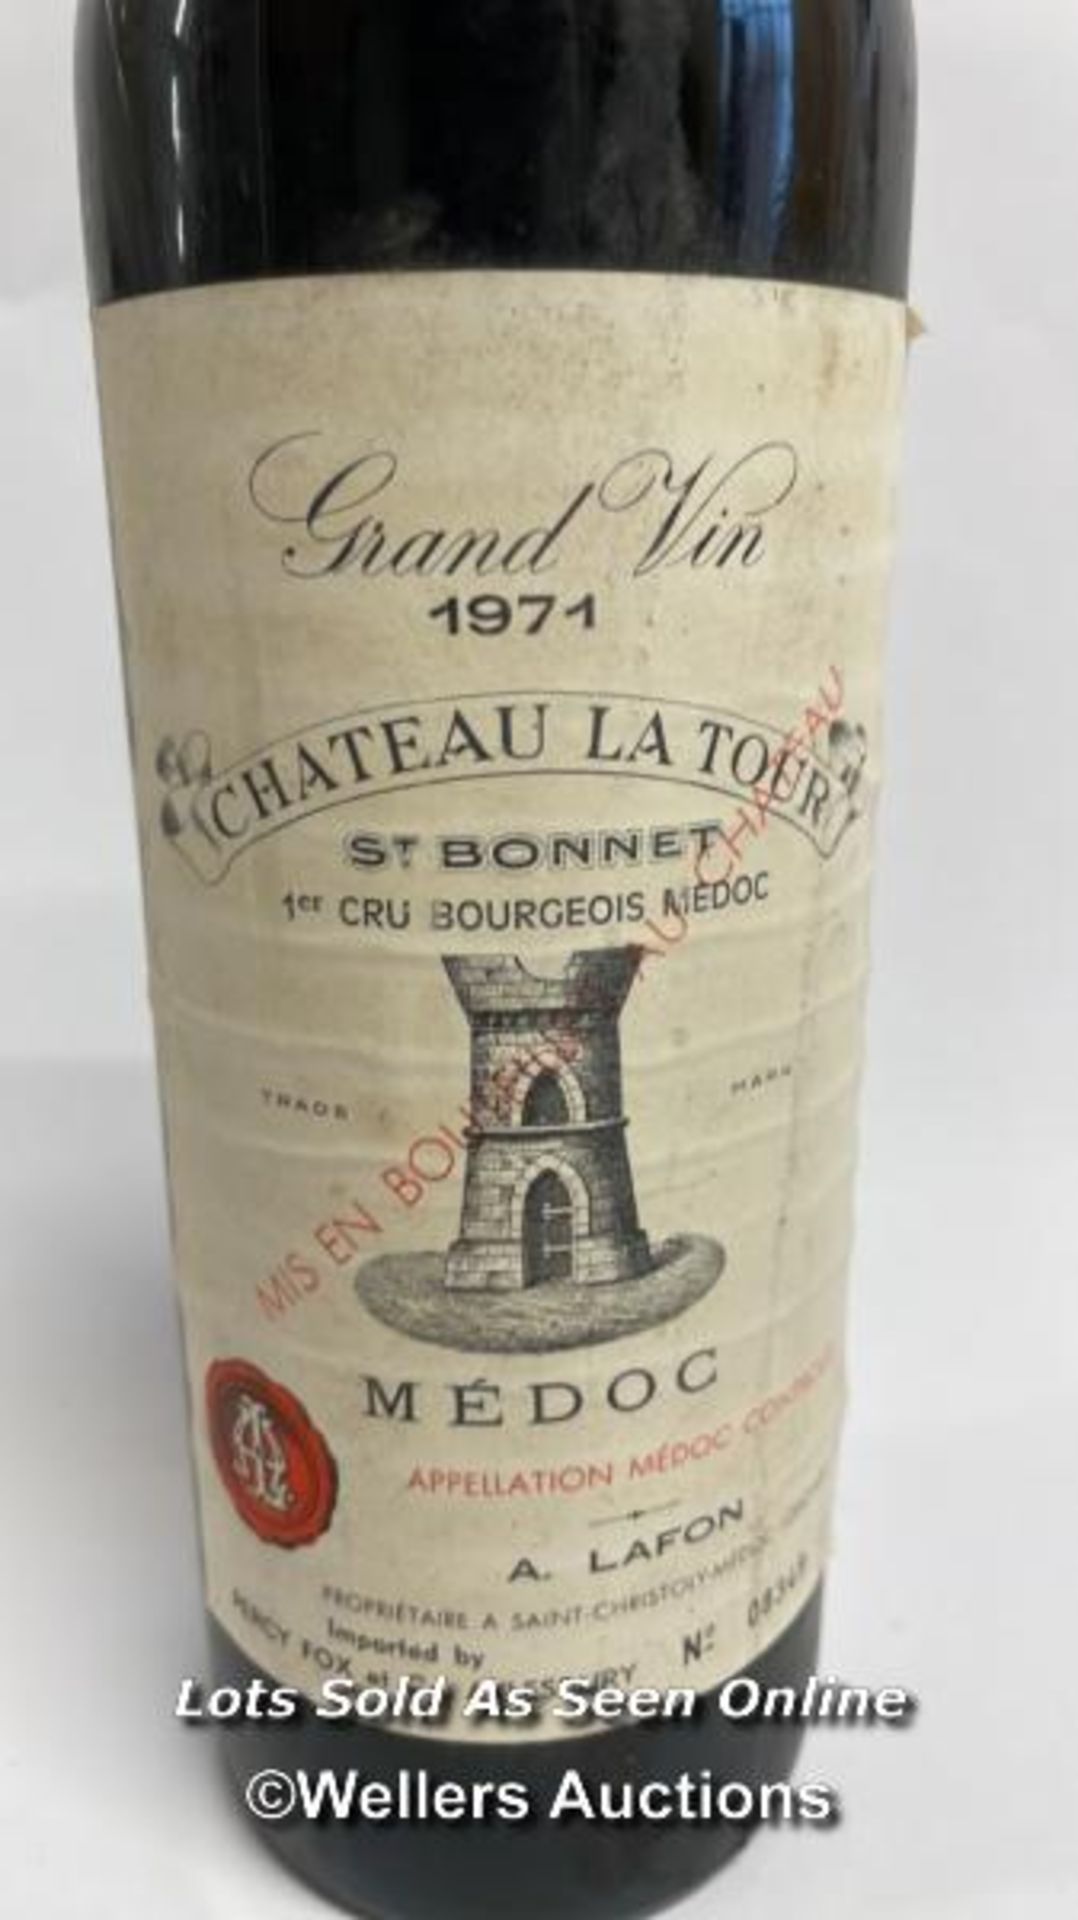 1971 Grand Vin Chateau Latour Premier Cru Bourgeois Medoc, 08349, 75cl / Please see images for - Image 2 of 4